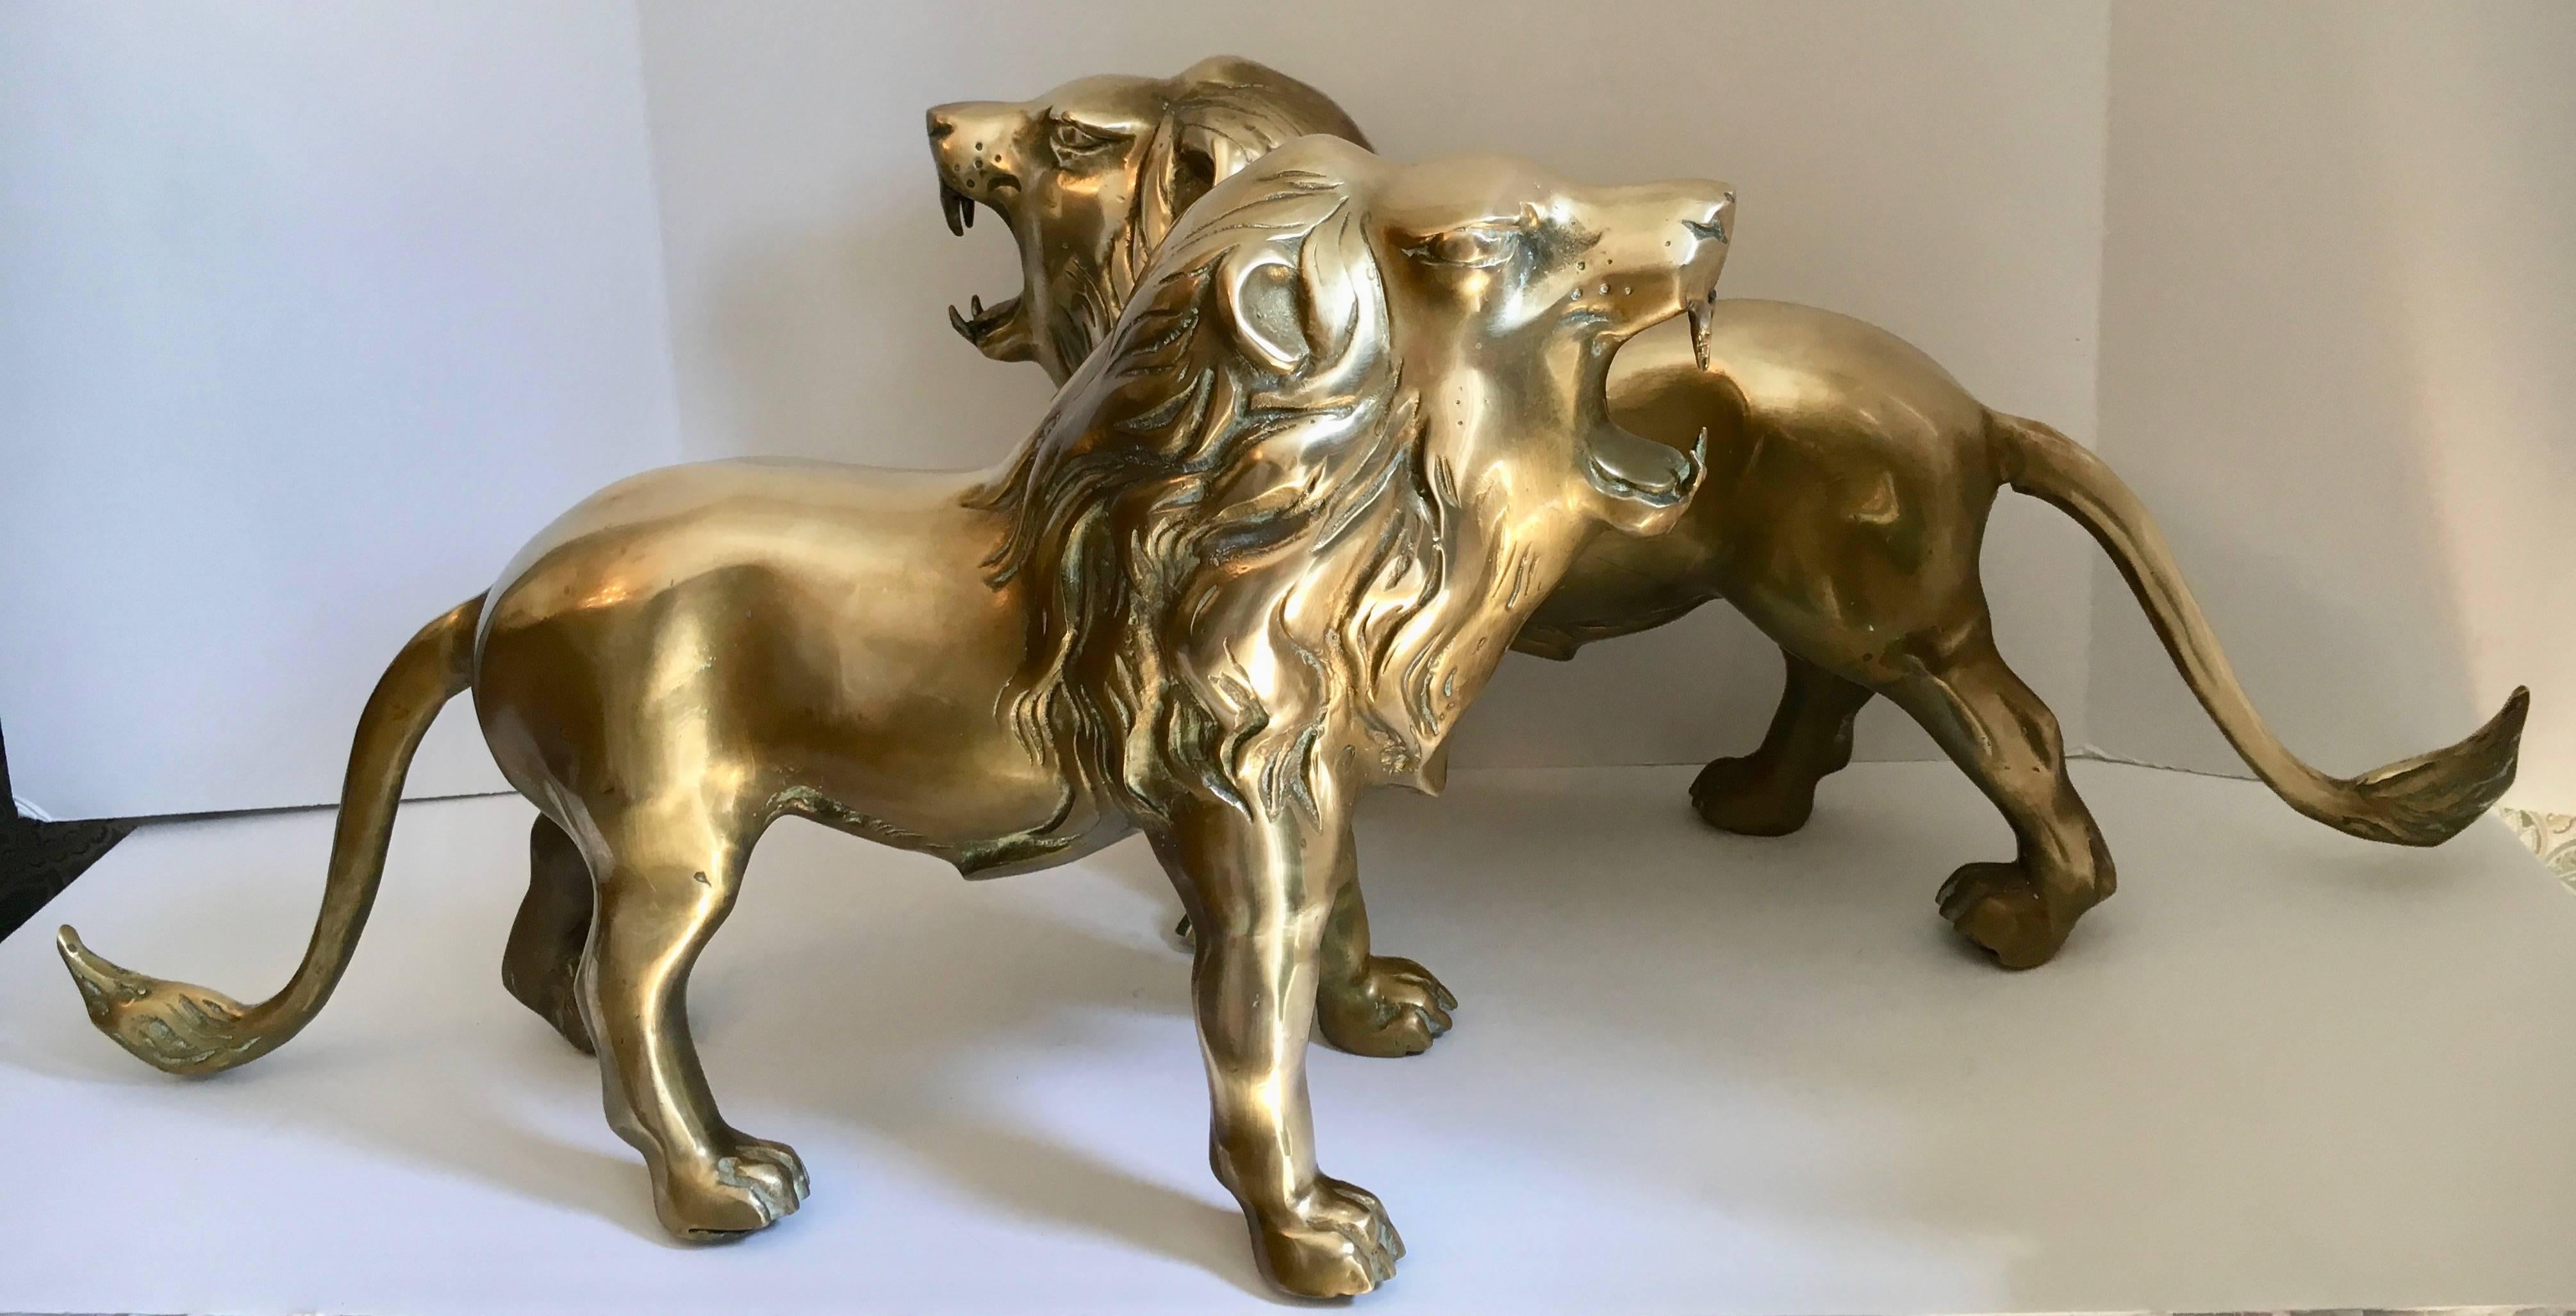 Pair of large brass lions. A very handsome pair of brass lions. The dominant and ferocious pair is large enough to hold a larger set of books in your library or shelf. As a decorative pair they can easily flank the mantle, table or shelf.